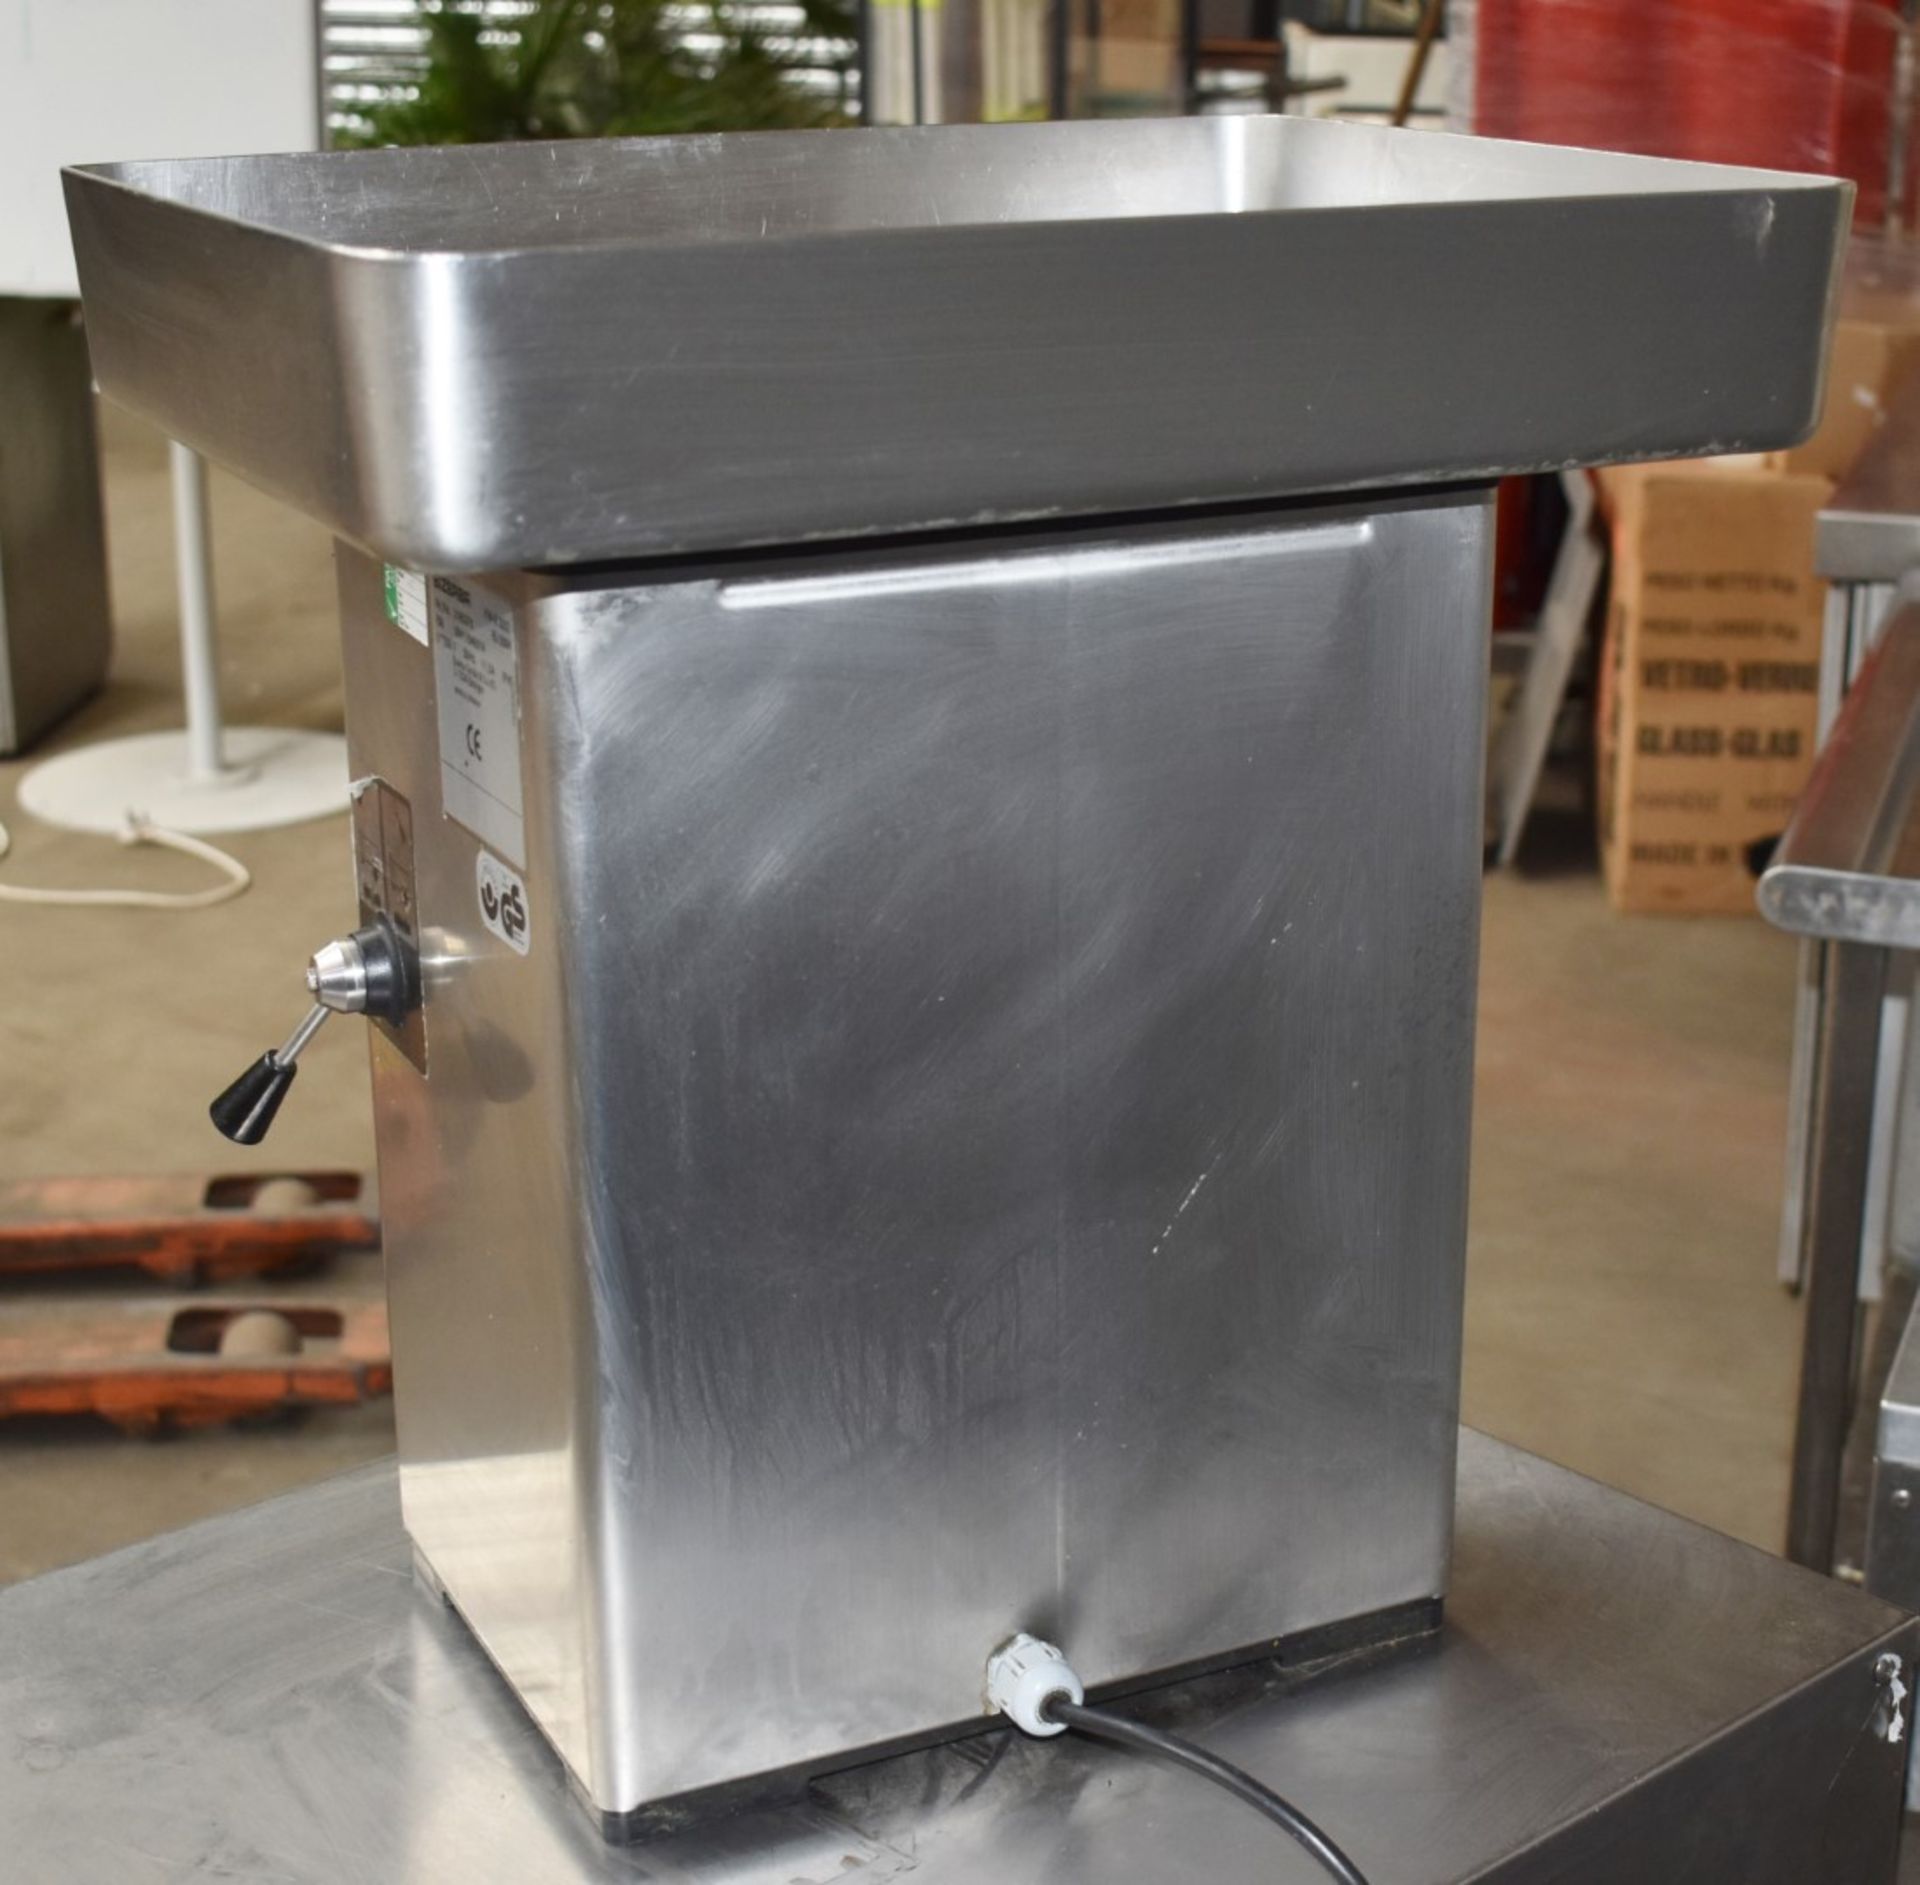 1 x Bizerba Meat Mincer - Stainless Steel Construction - Model FW-N 22/2 - 240v UK Plug - Recently - Image 5 of 12